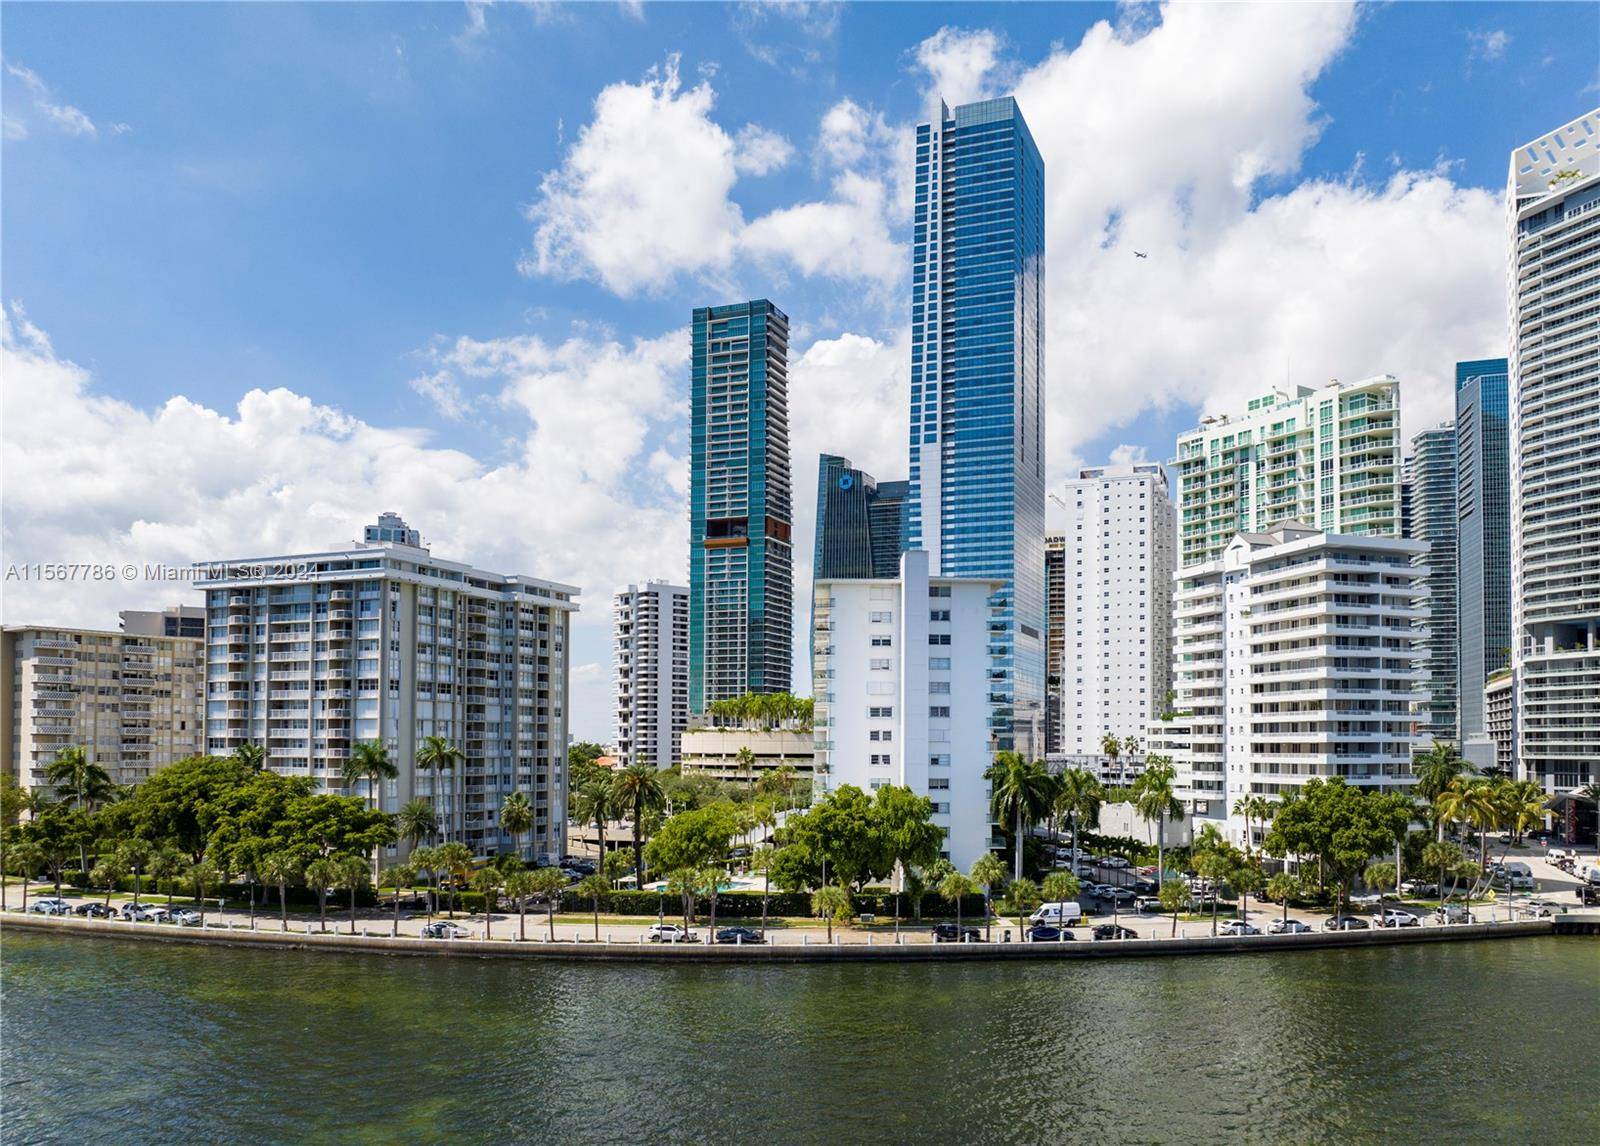 Prime location in the bustling finance and business hub of Brickell, this bayside gem offers a spacious 2 bed, 2 bath unit with a captivating bay view.